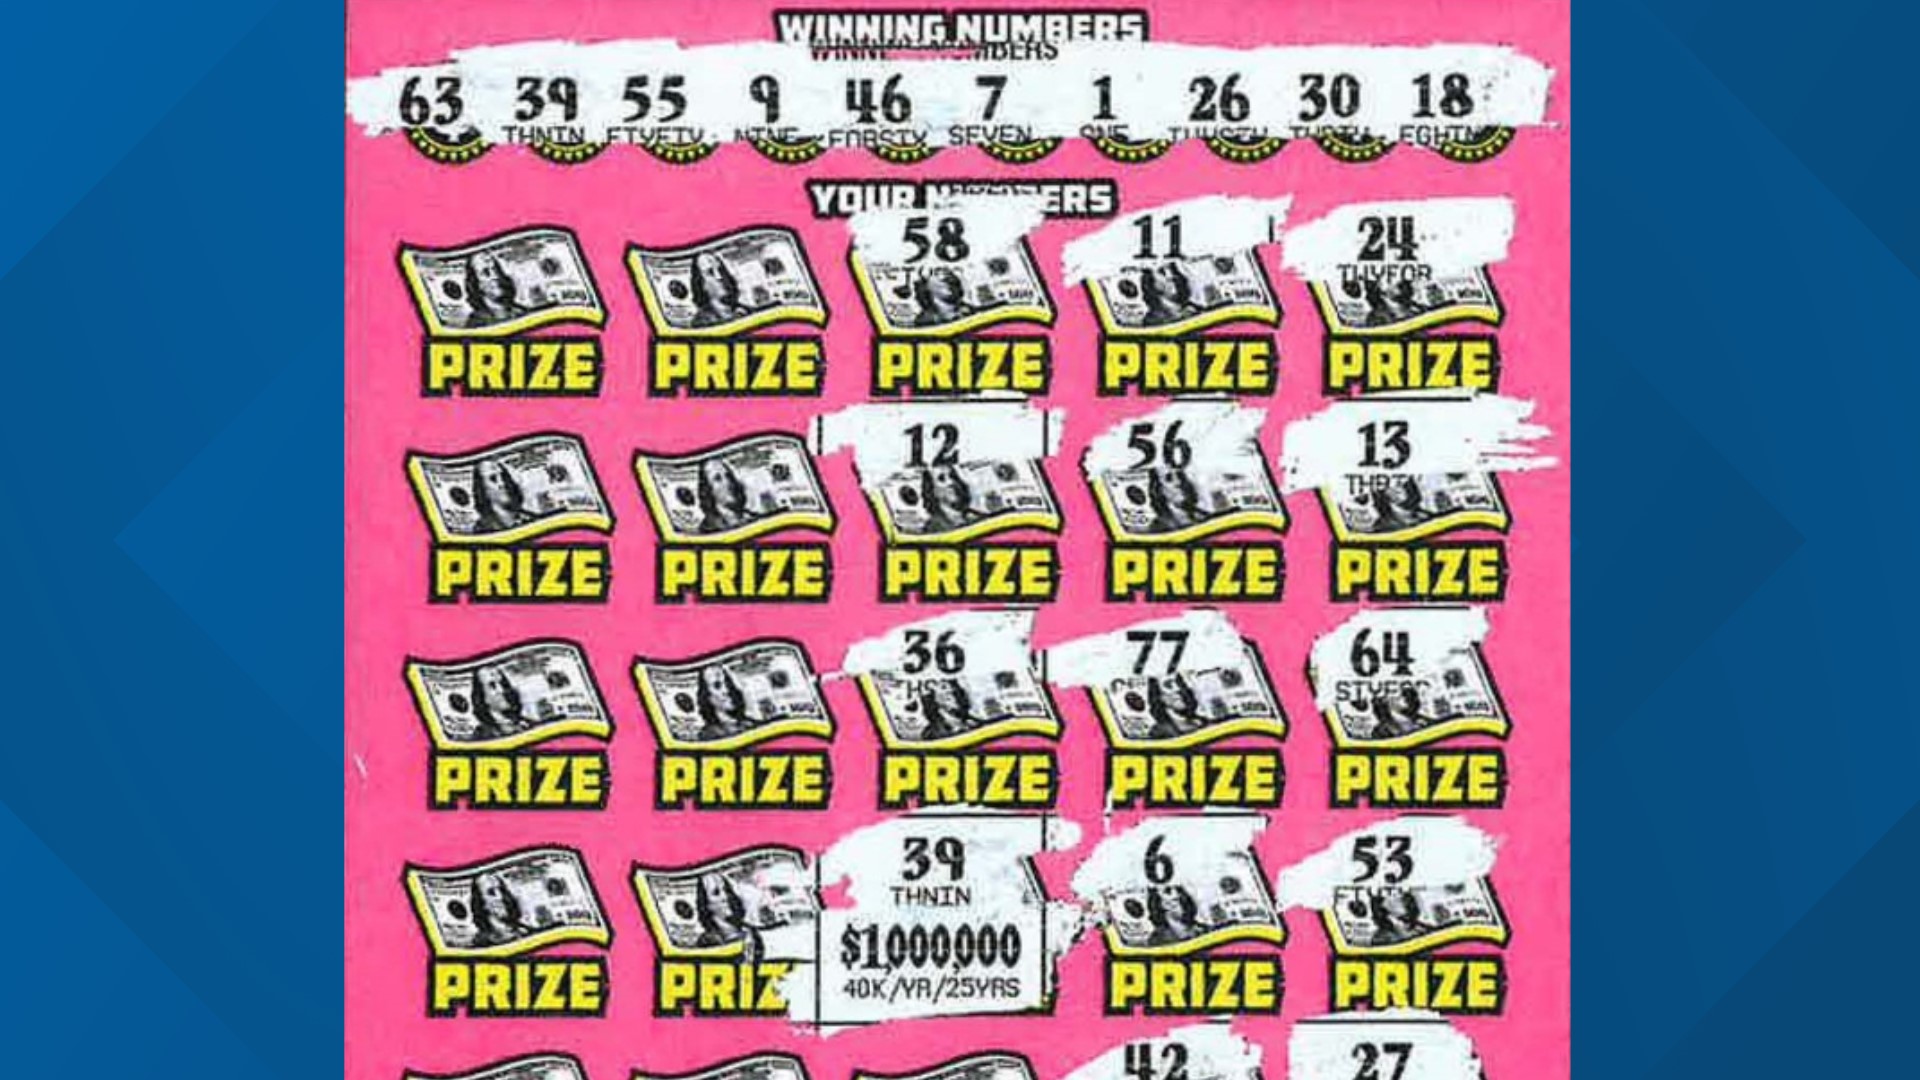 The winning ticket was bought from Starke Shell, located at 115 South Temple Avenue in Starke.